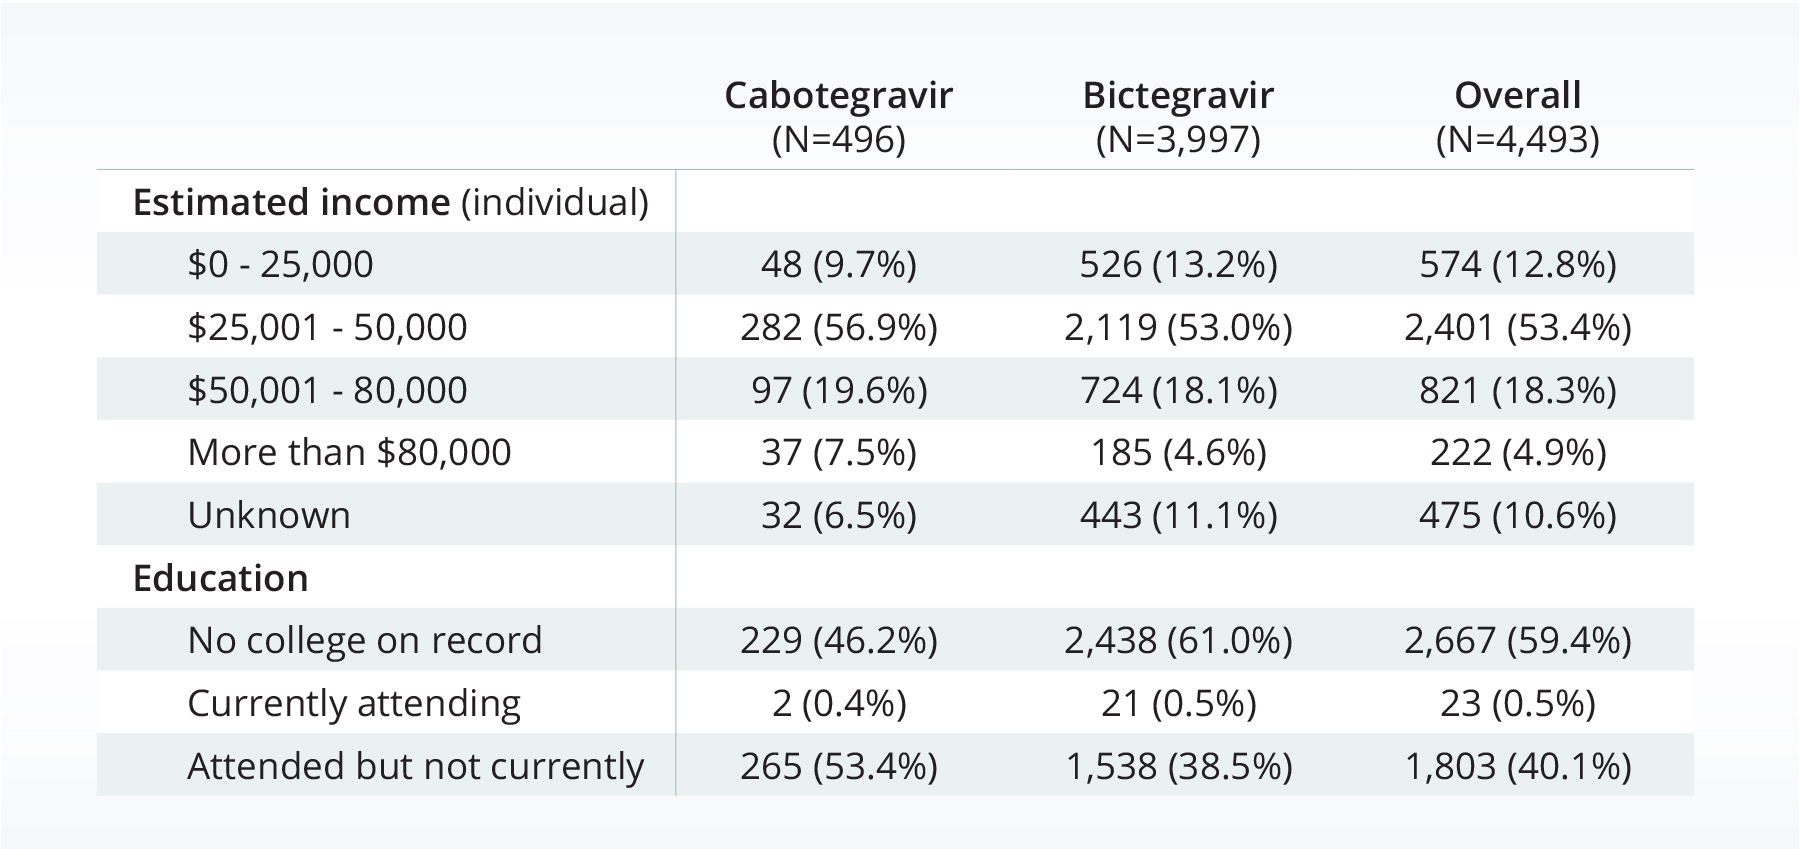 SDOH factors for patients with HIV taking cabotegravir or bictegravir